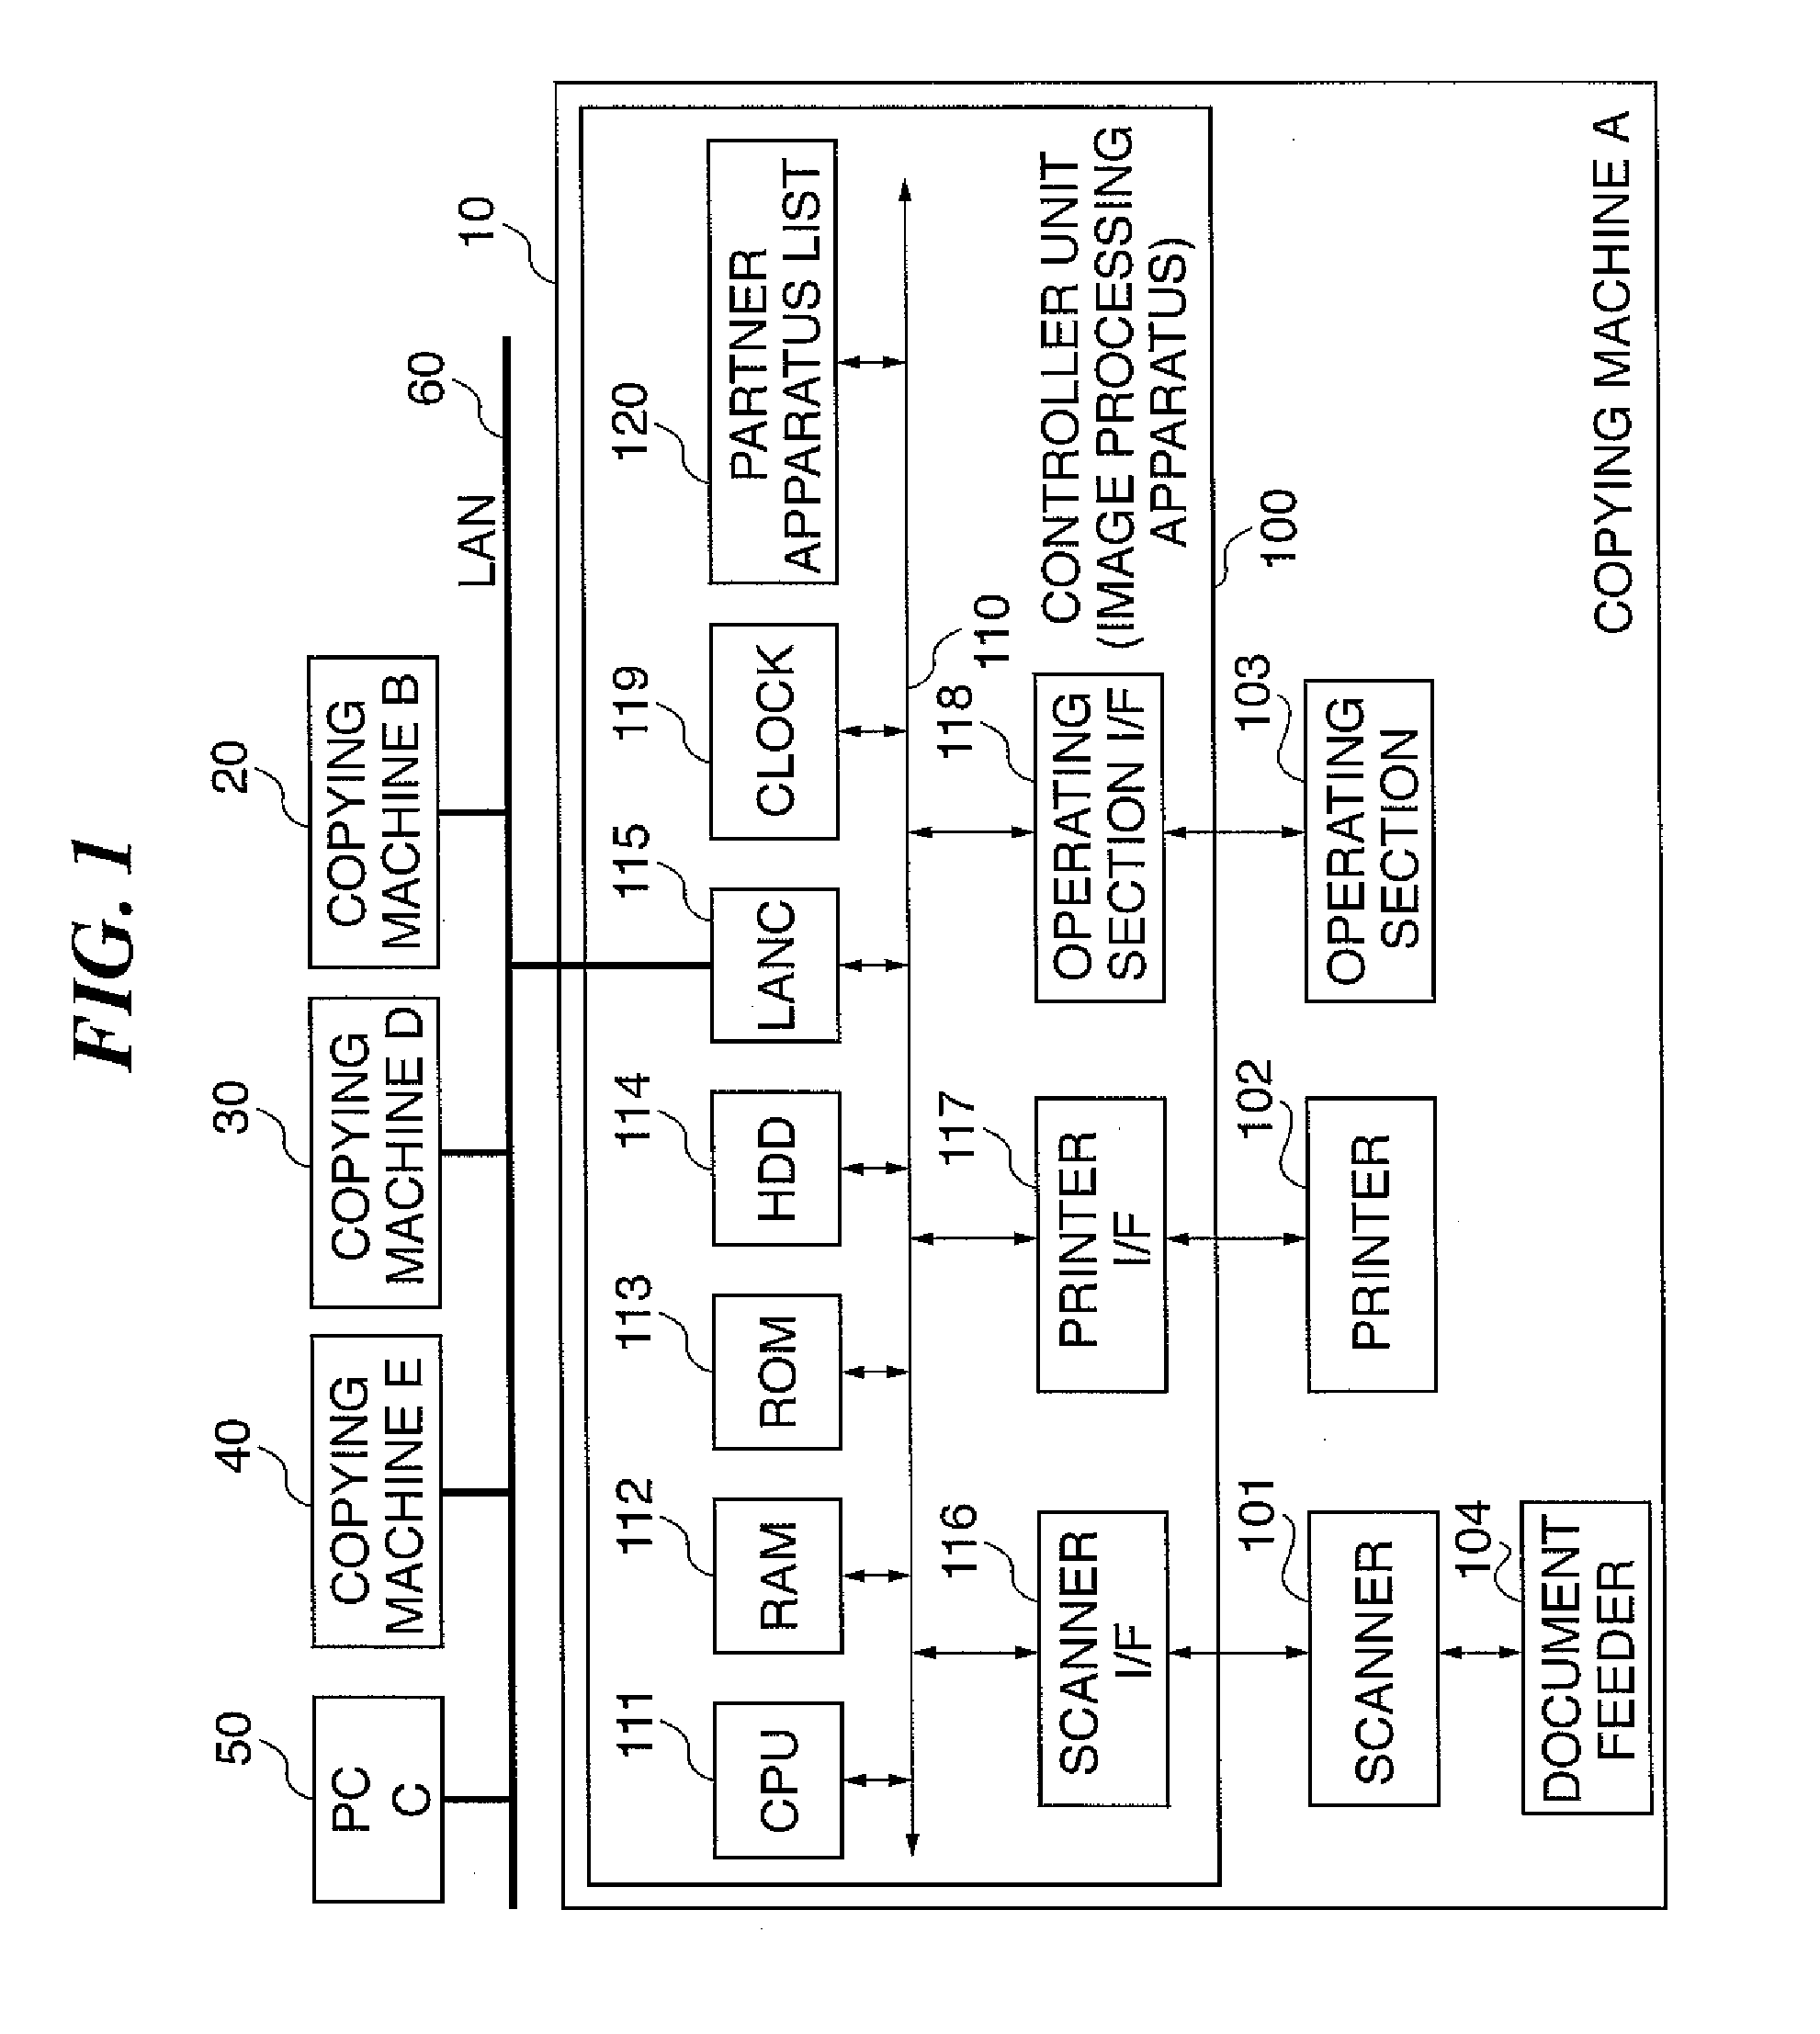 Image forming apparatus and control method therefor, and control program for implementing the method